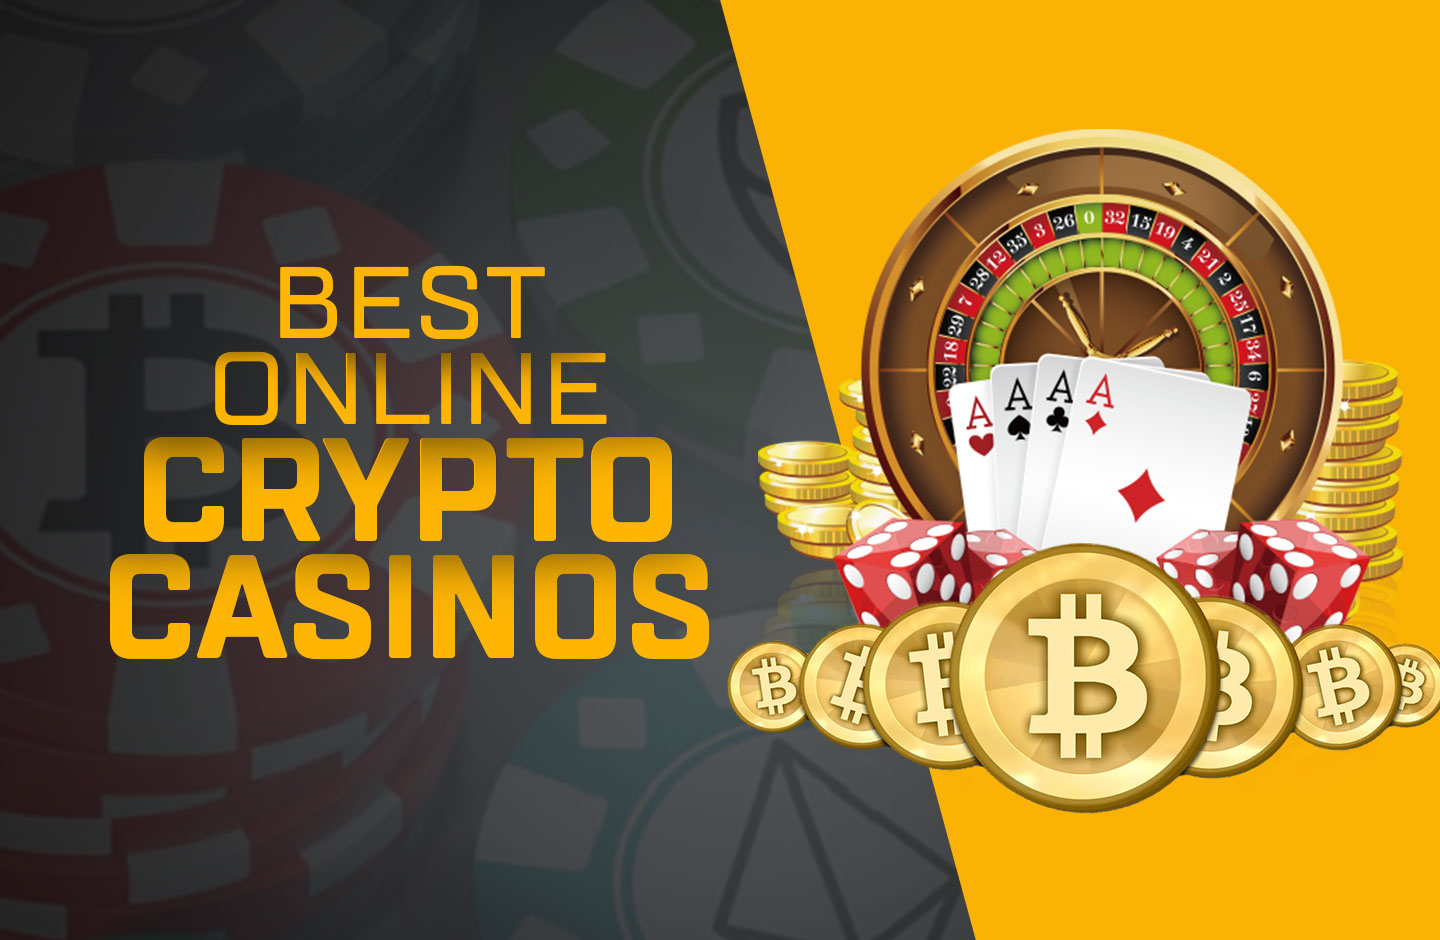 casino bitcoin Doesn't Have To Be Hard. Read These 9 Tricks Go Get A Head Start.